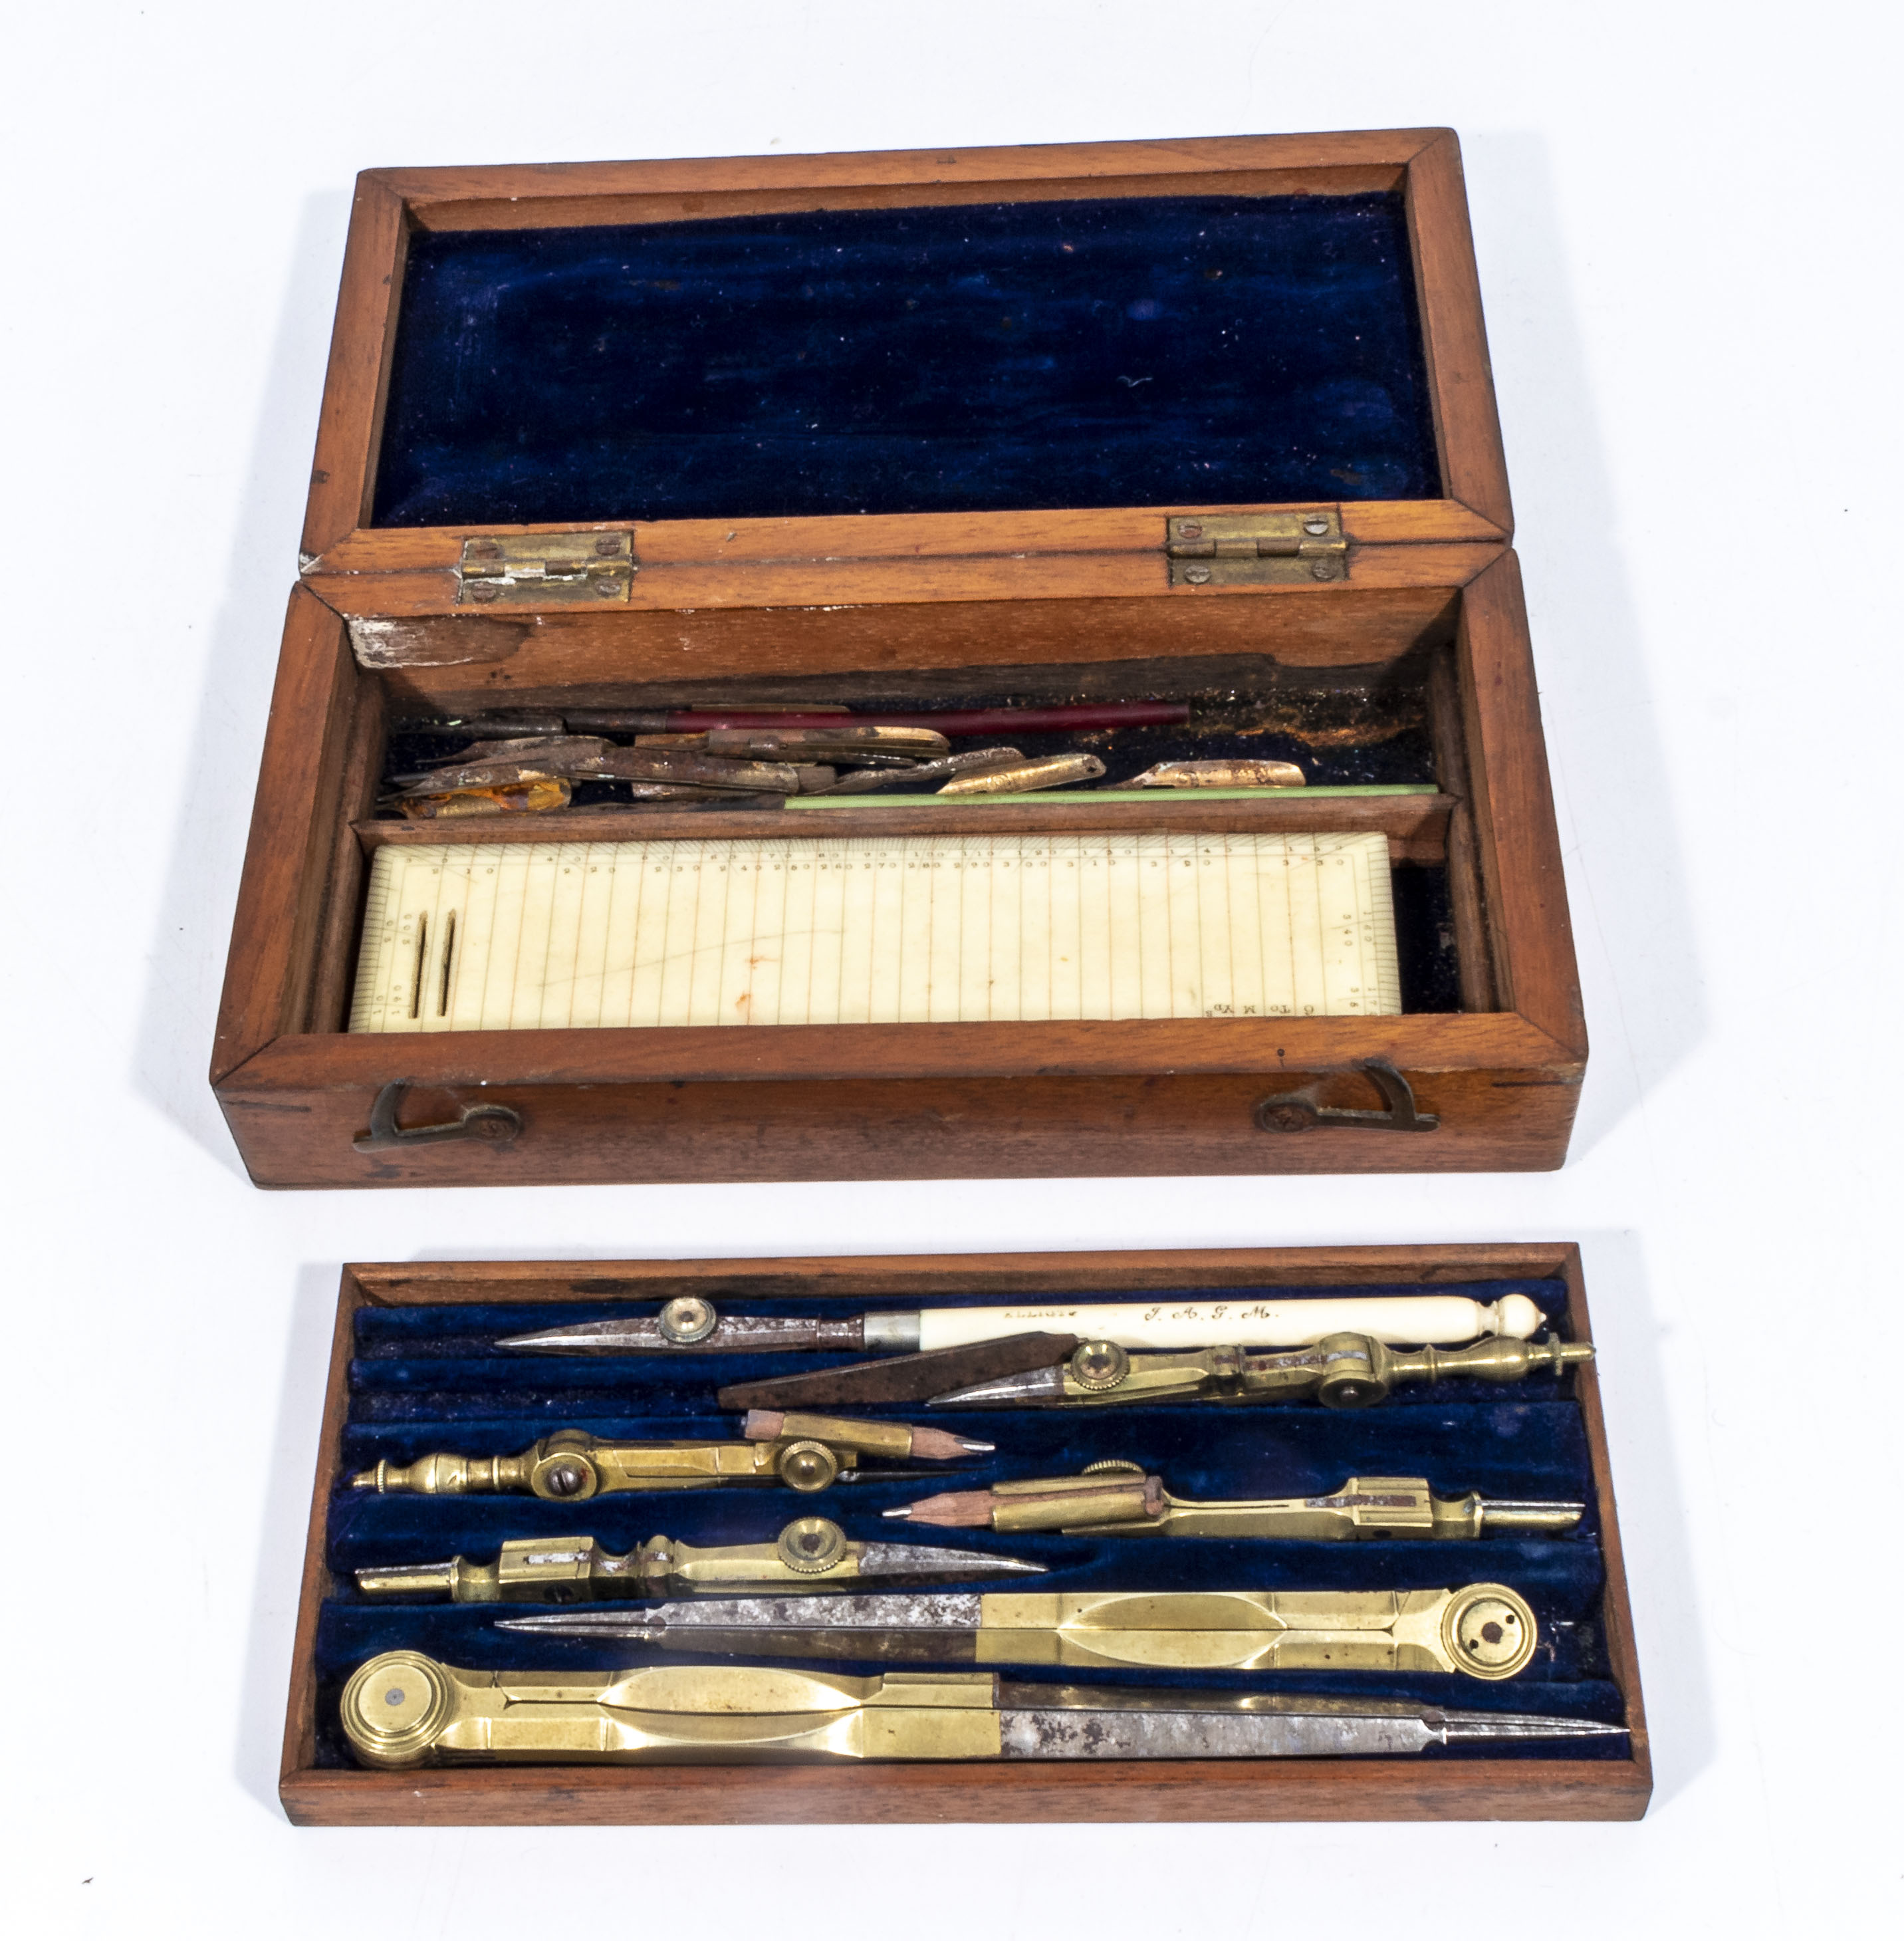 High quality Victorian draughtman's set of instruments in double layer fitted box